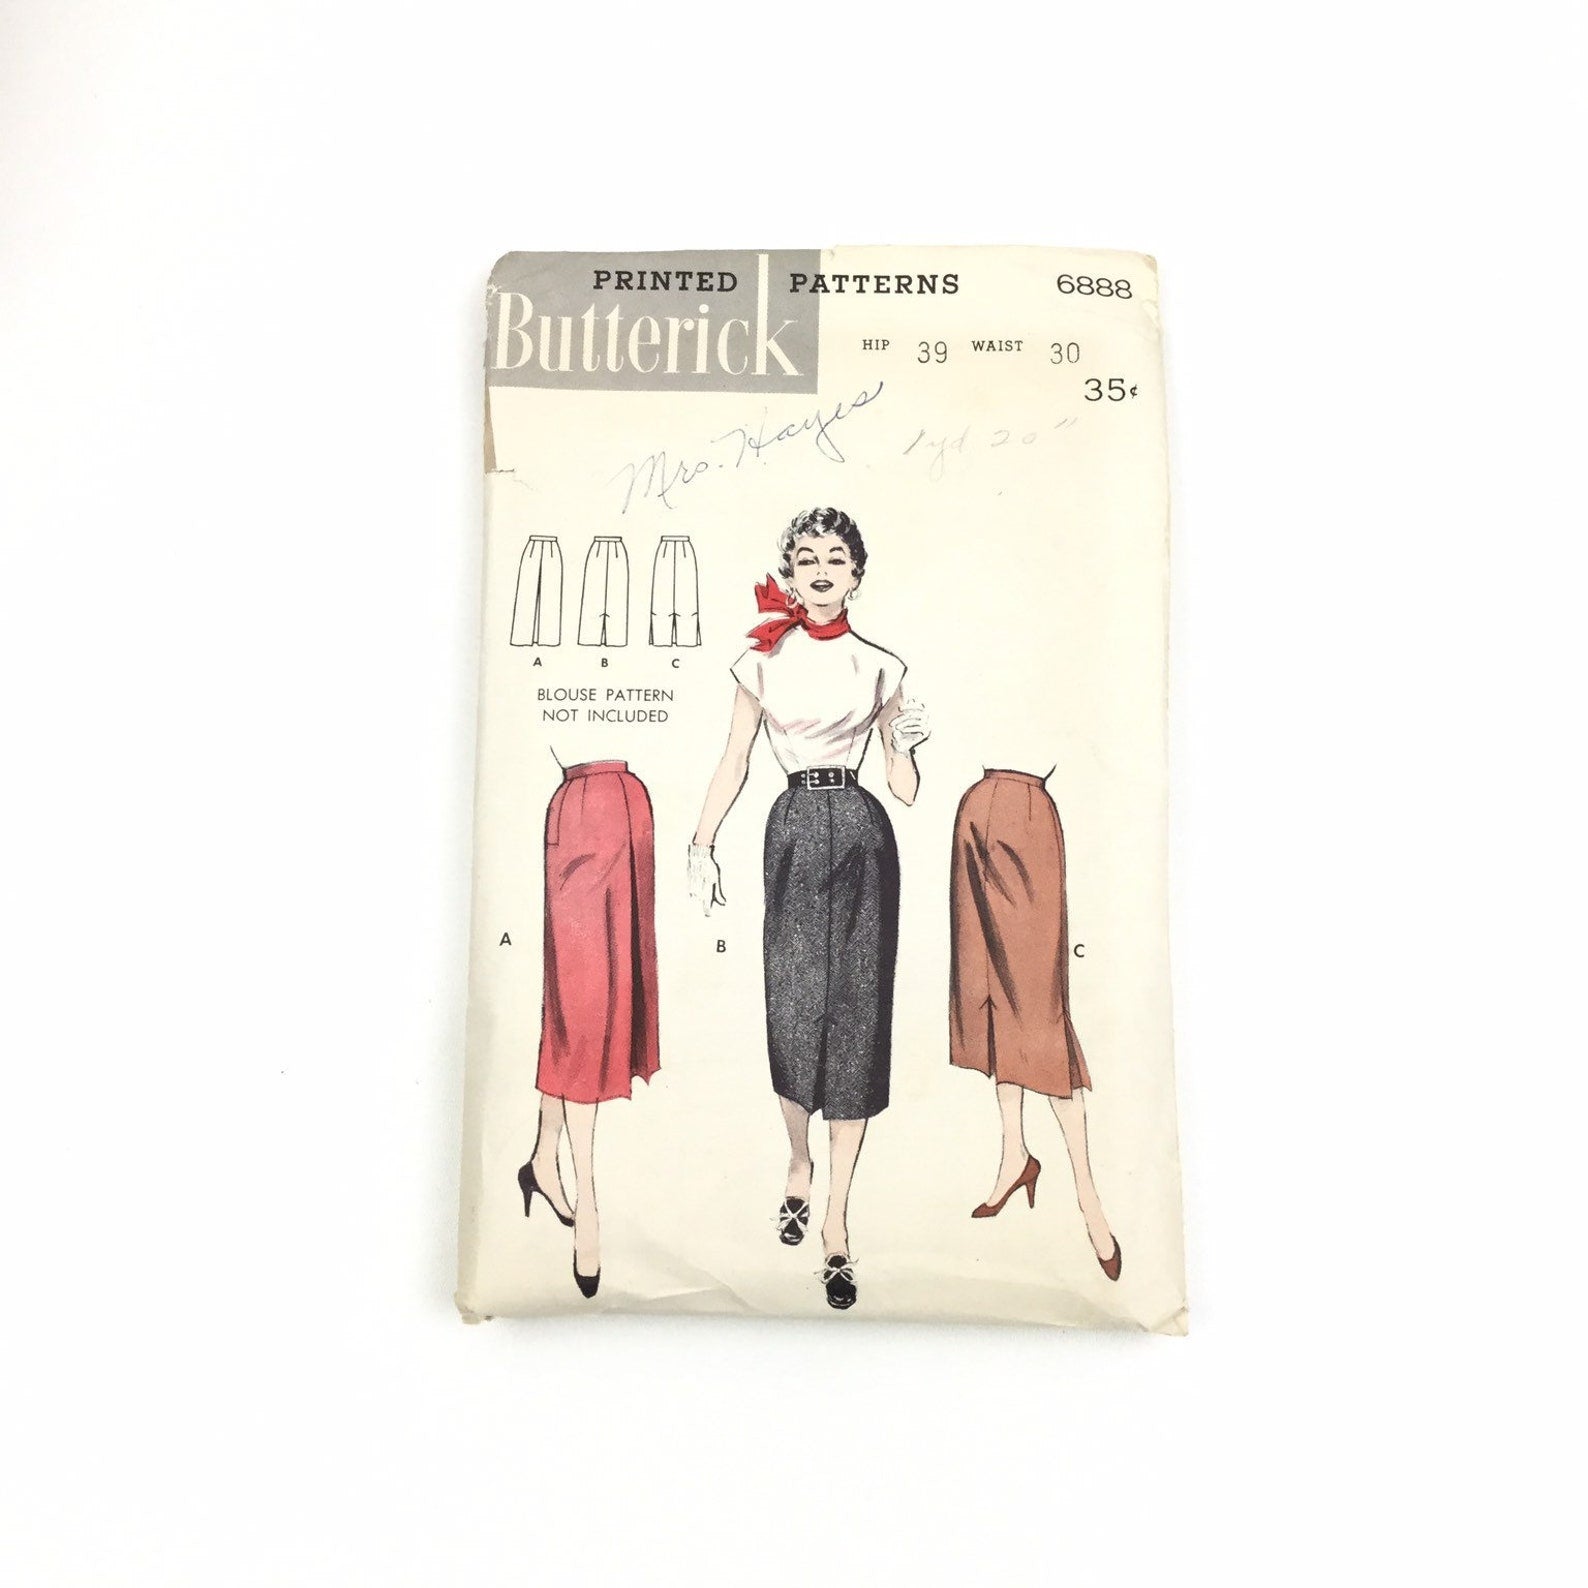 Vintage 1950s Four Gore Slim Skirt Sewing Pattern, Butterick 6888, High Waist Pleated 50s Skirt, Smartest Choice, Grease Style Pencil Skirt